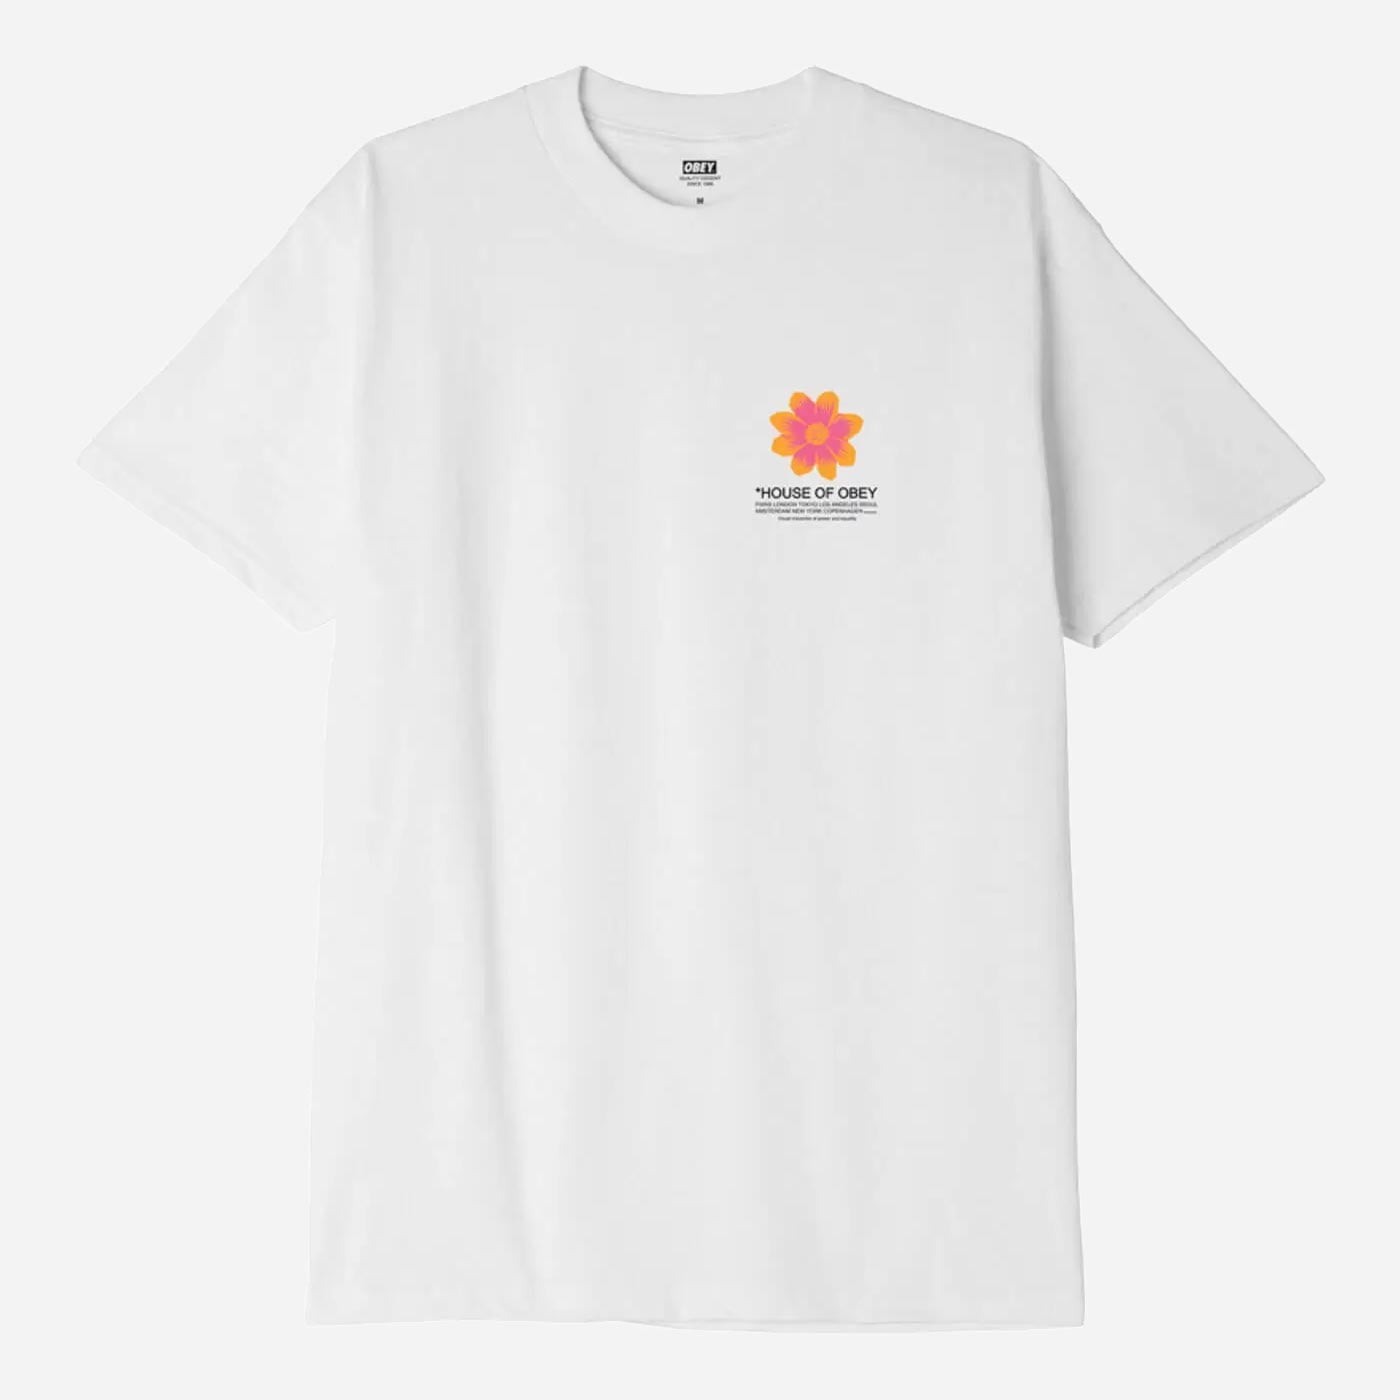 Obey House Of Obey Flower Regular Fit Short Sleeve Tee - White